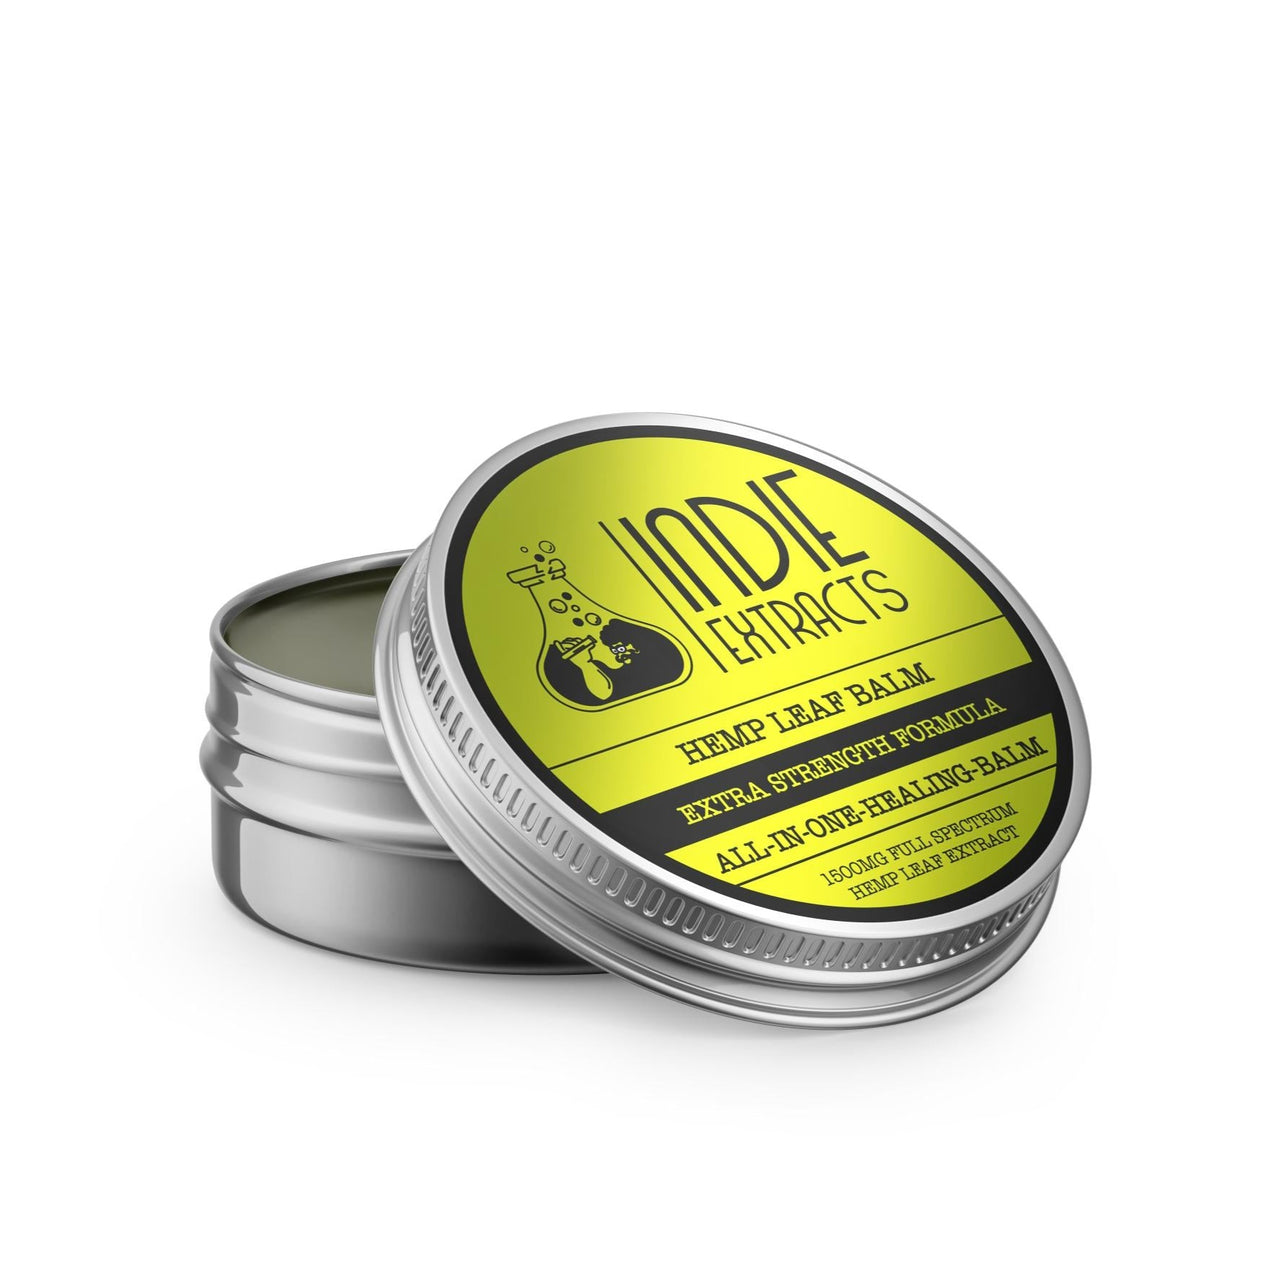 Indie Extracts- Hemp Leaf All-in-one Healing Balm | Lavender